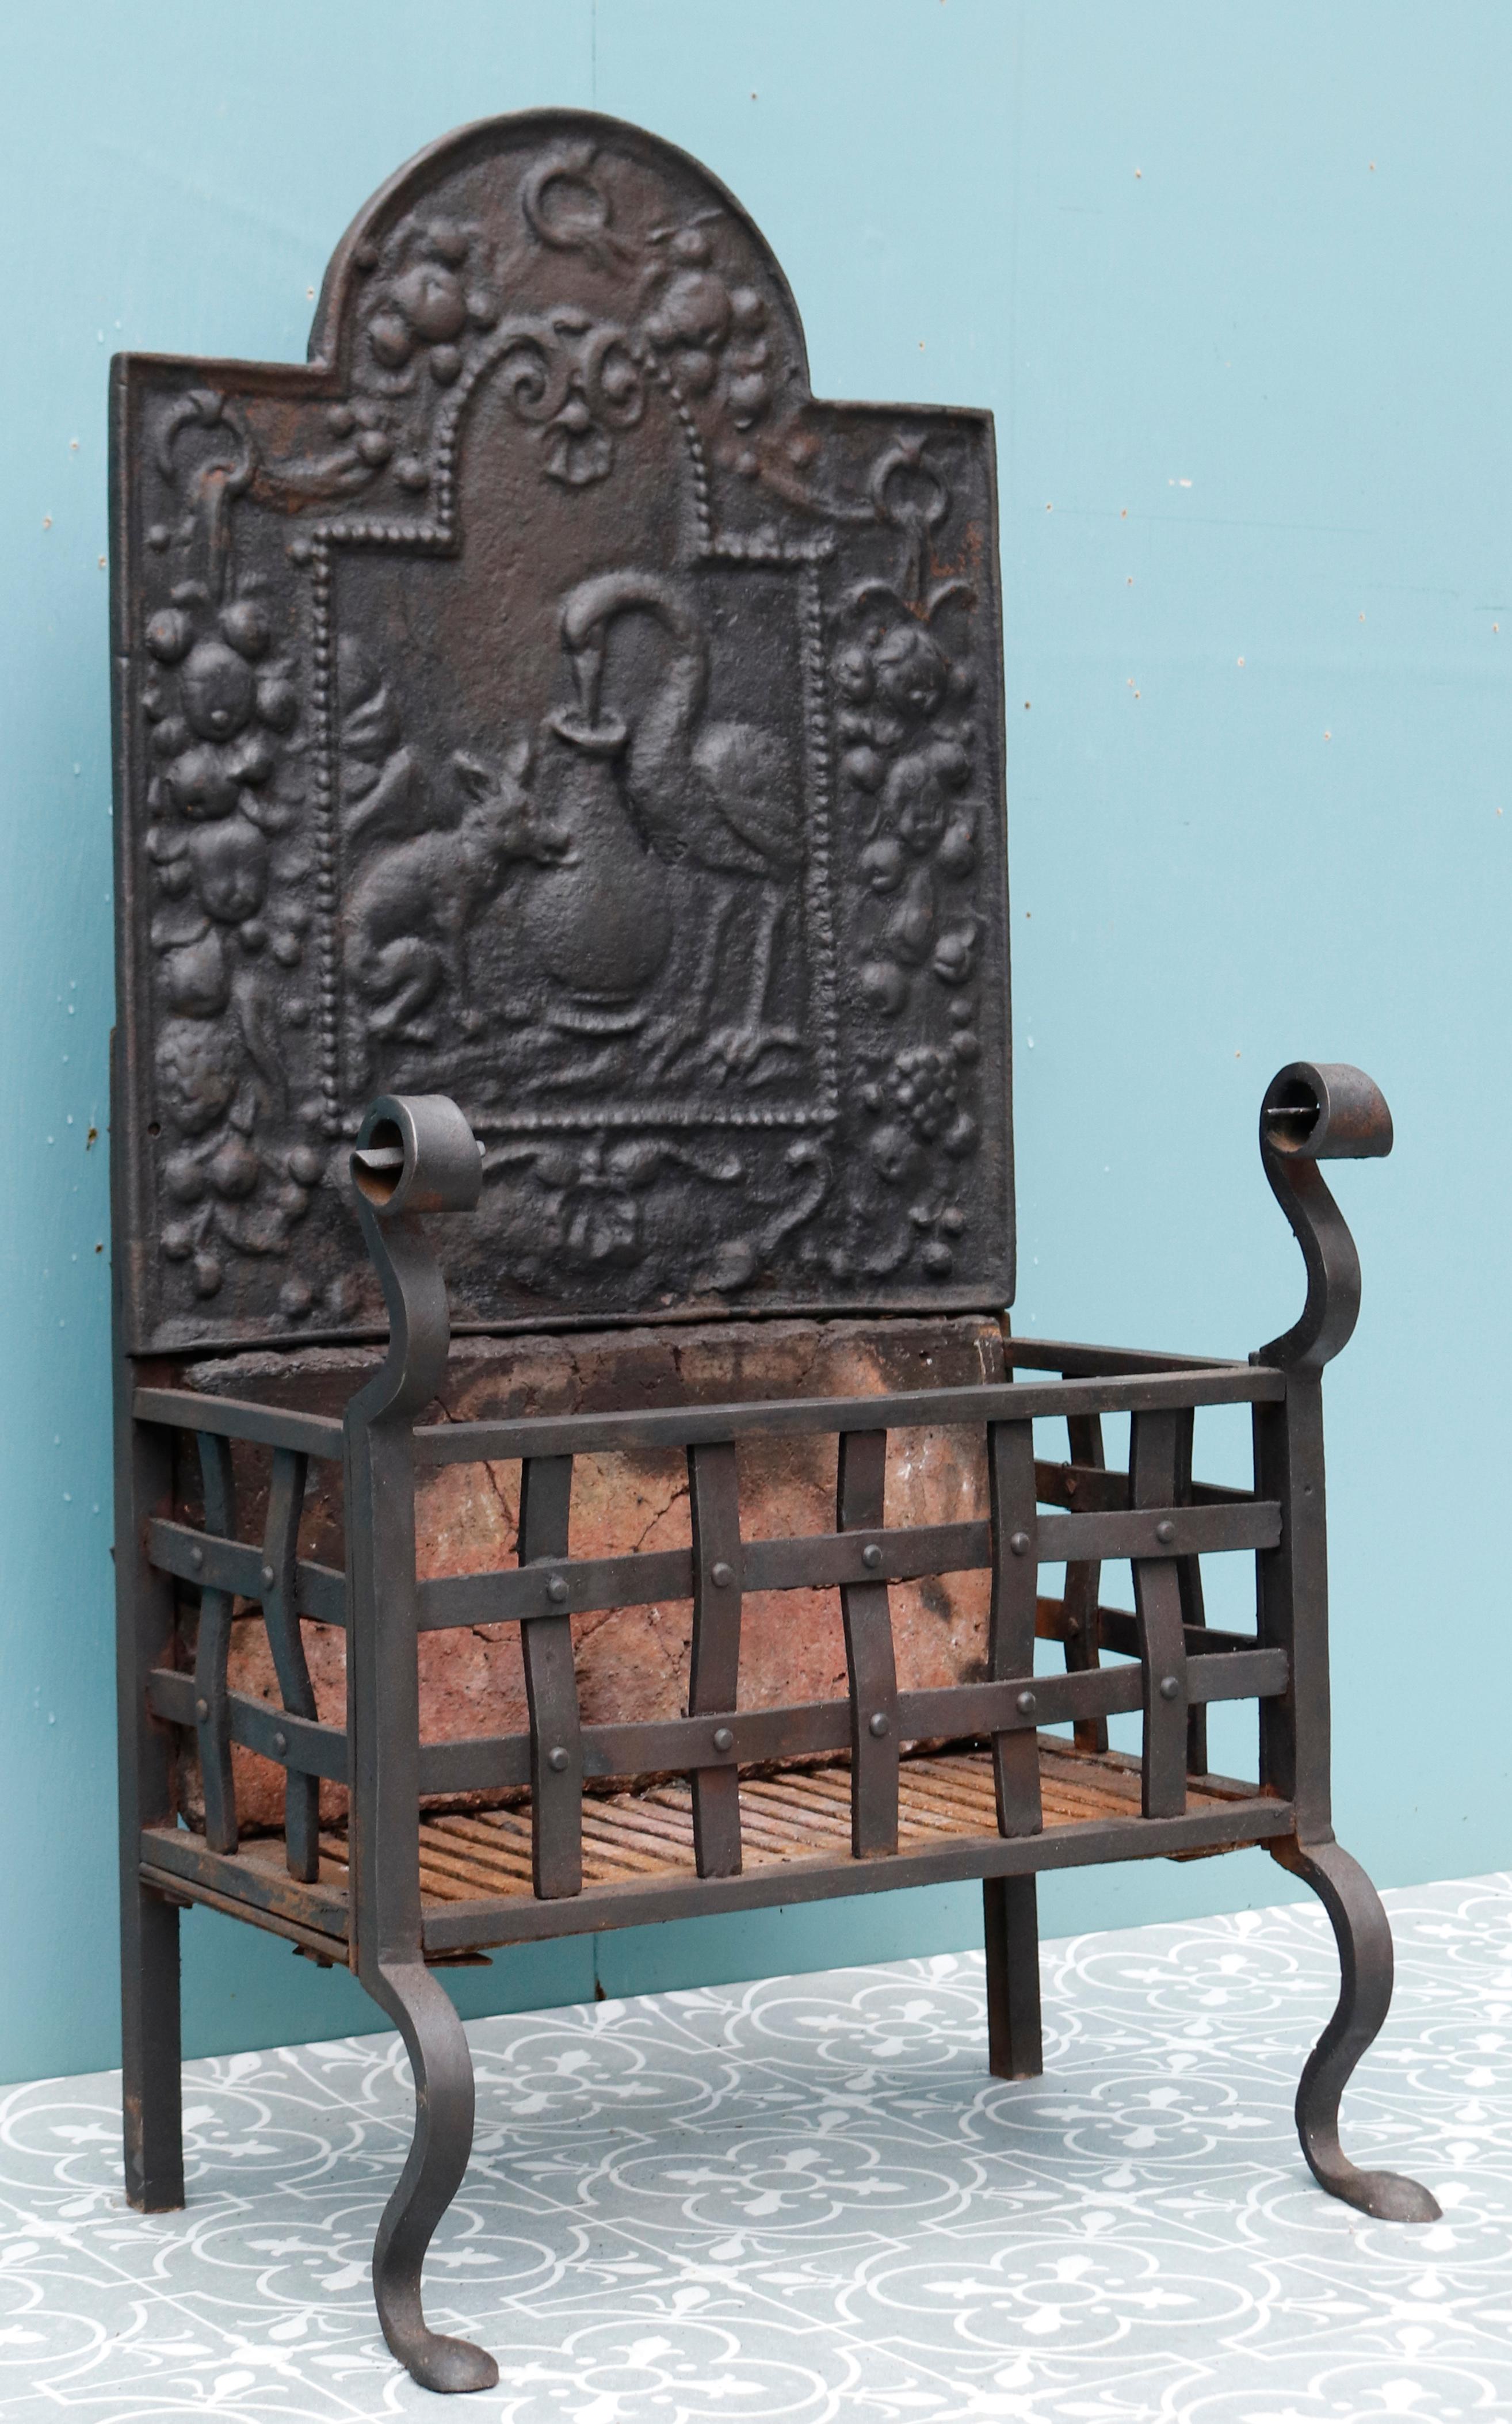 A large antique fire basket constructed from cast and wrought iron. The backplate depicting an Aesops fable scene.